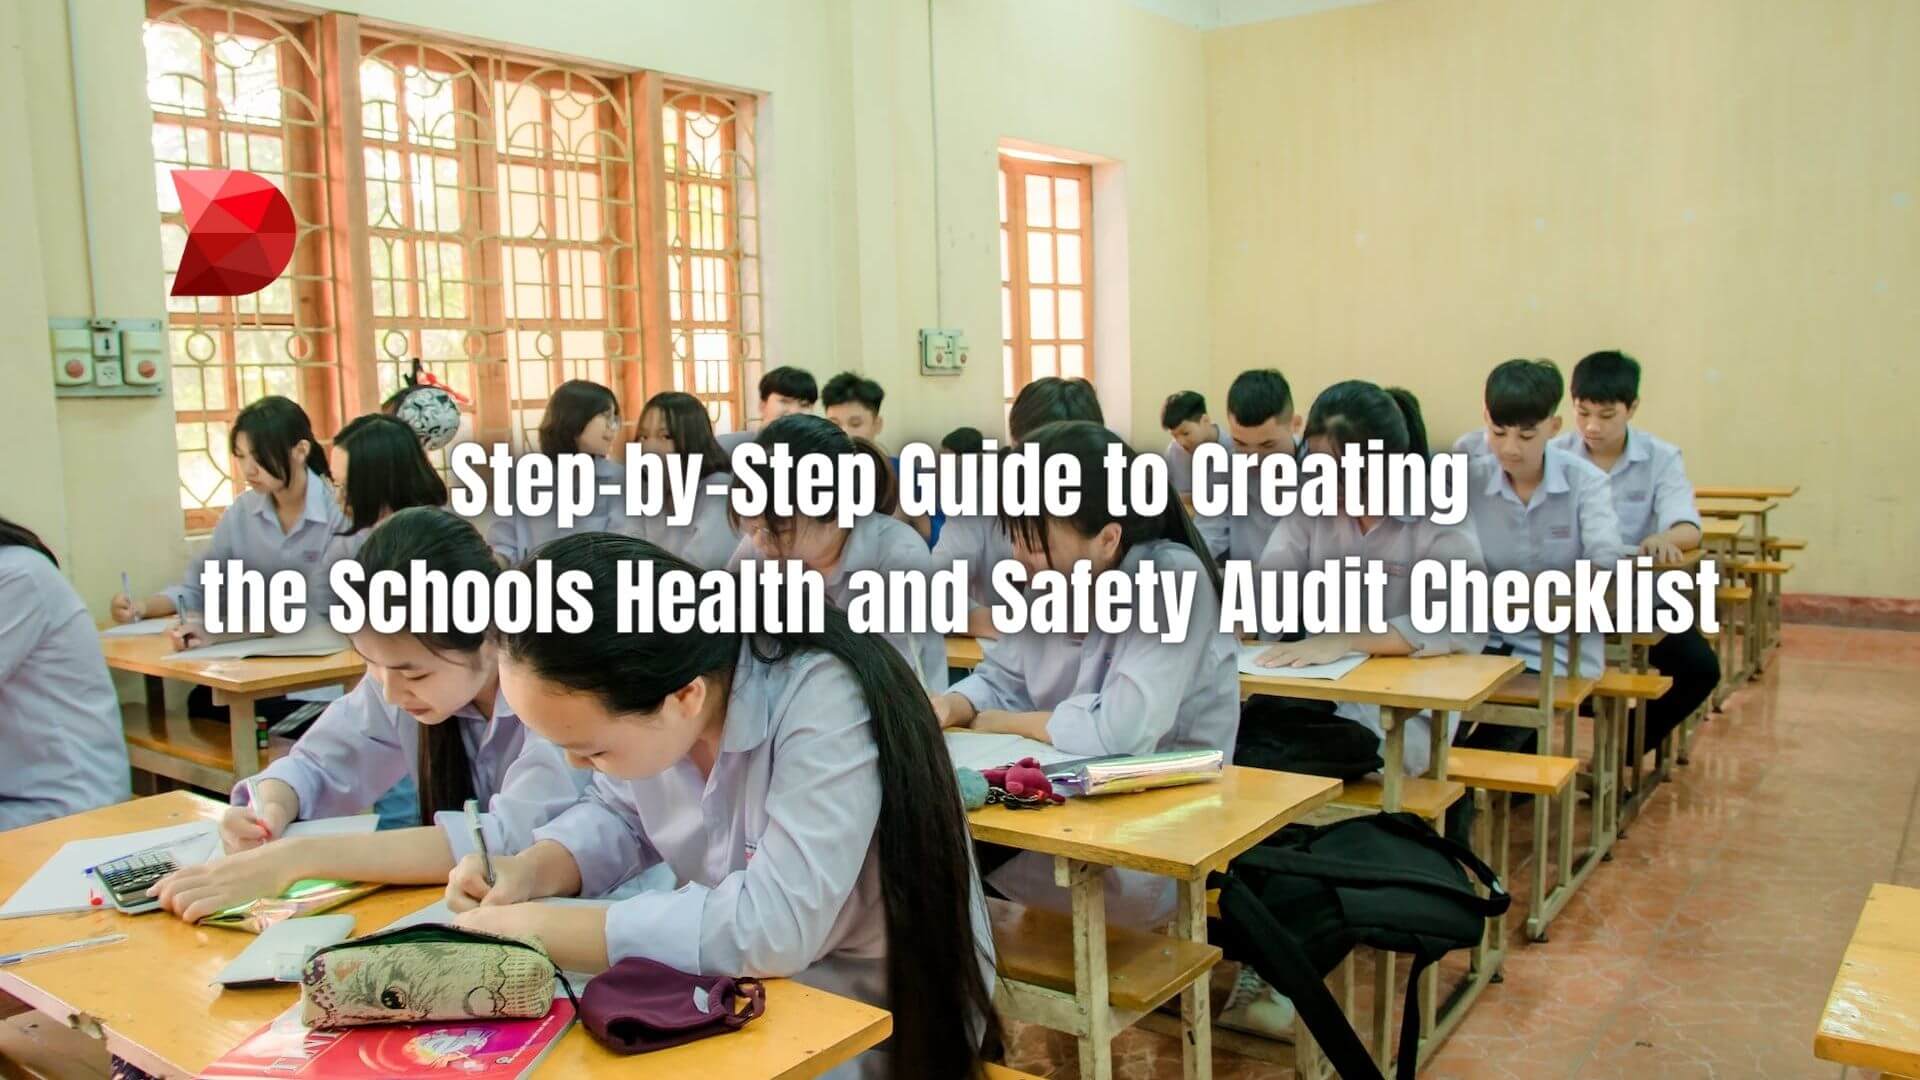 Creating a Schools Health and Safety Audit Checklist helps ensure students and staff's safety and a healthy environment. Learn how!